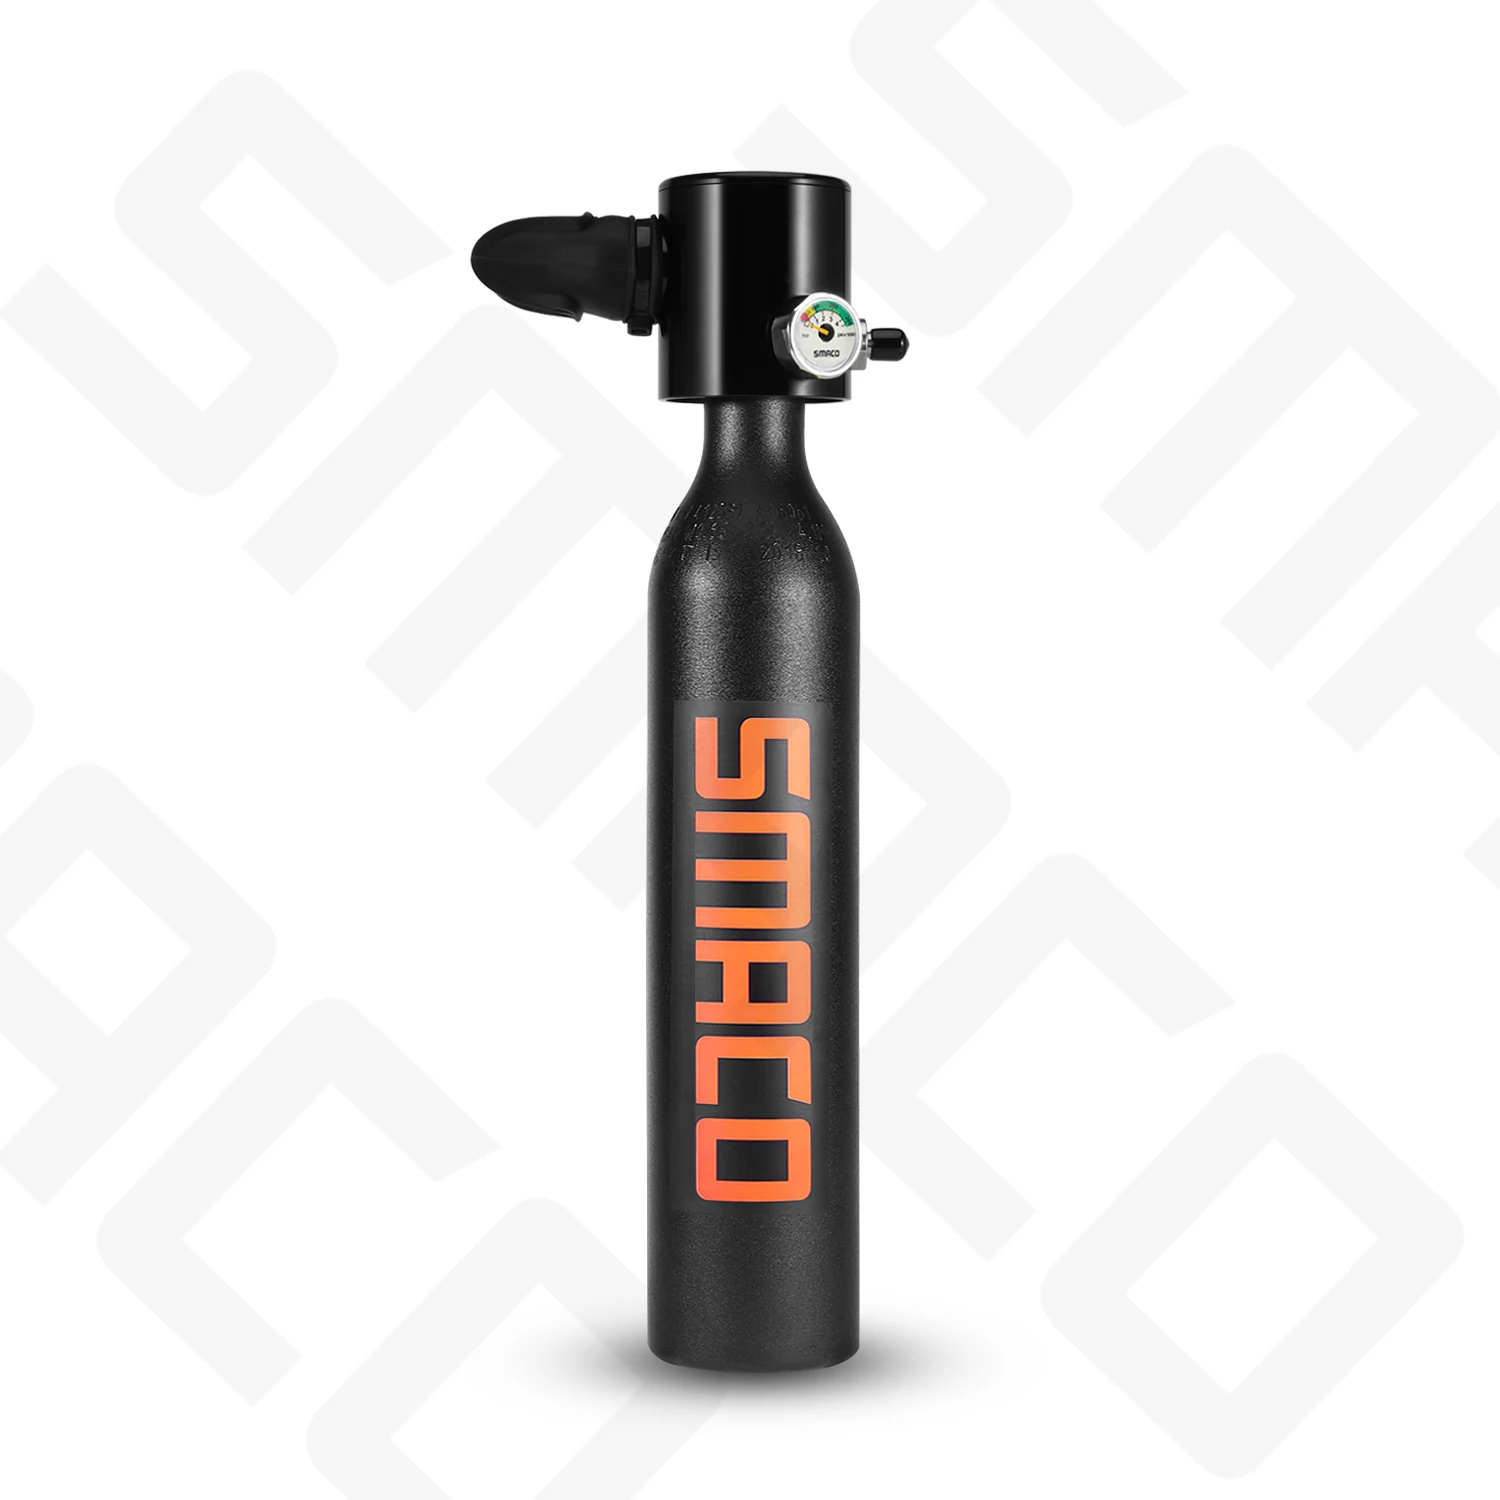 SMACO Diving Equipment oxygen cylinder set Mini scuba tank total freedom breath underwater for 5 προς την 10 λεπτά